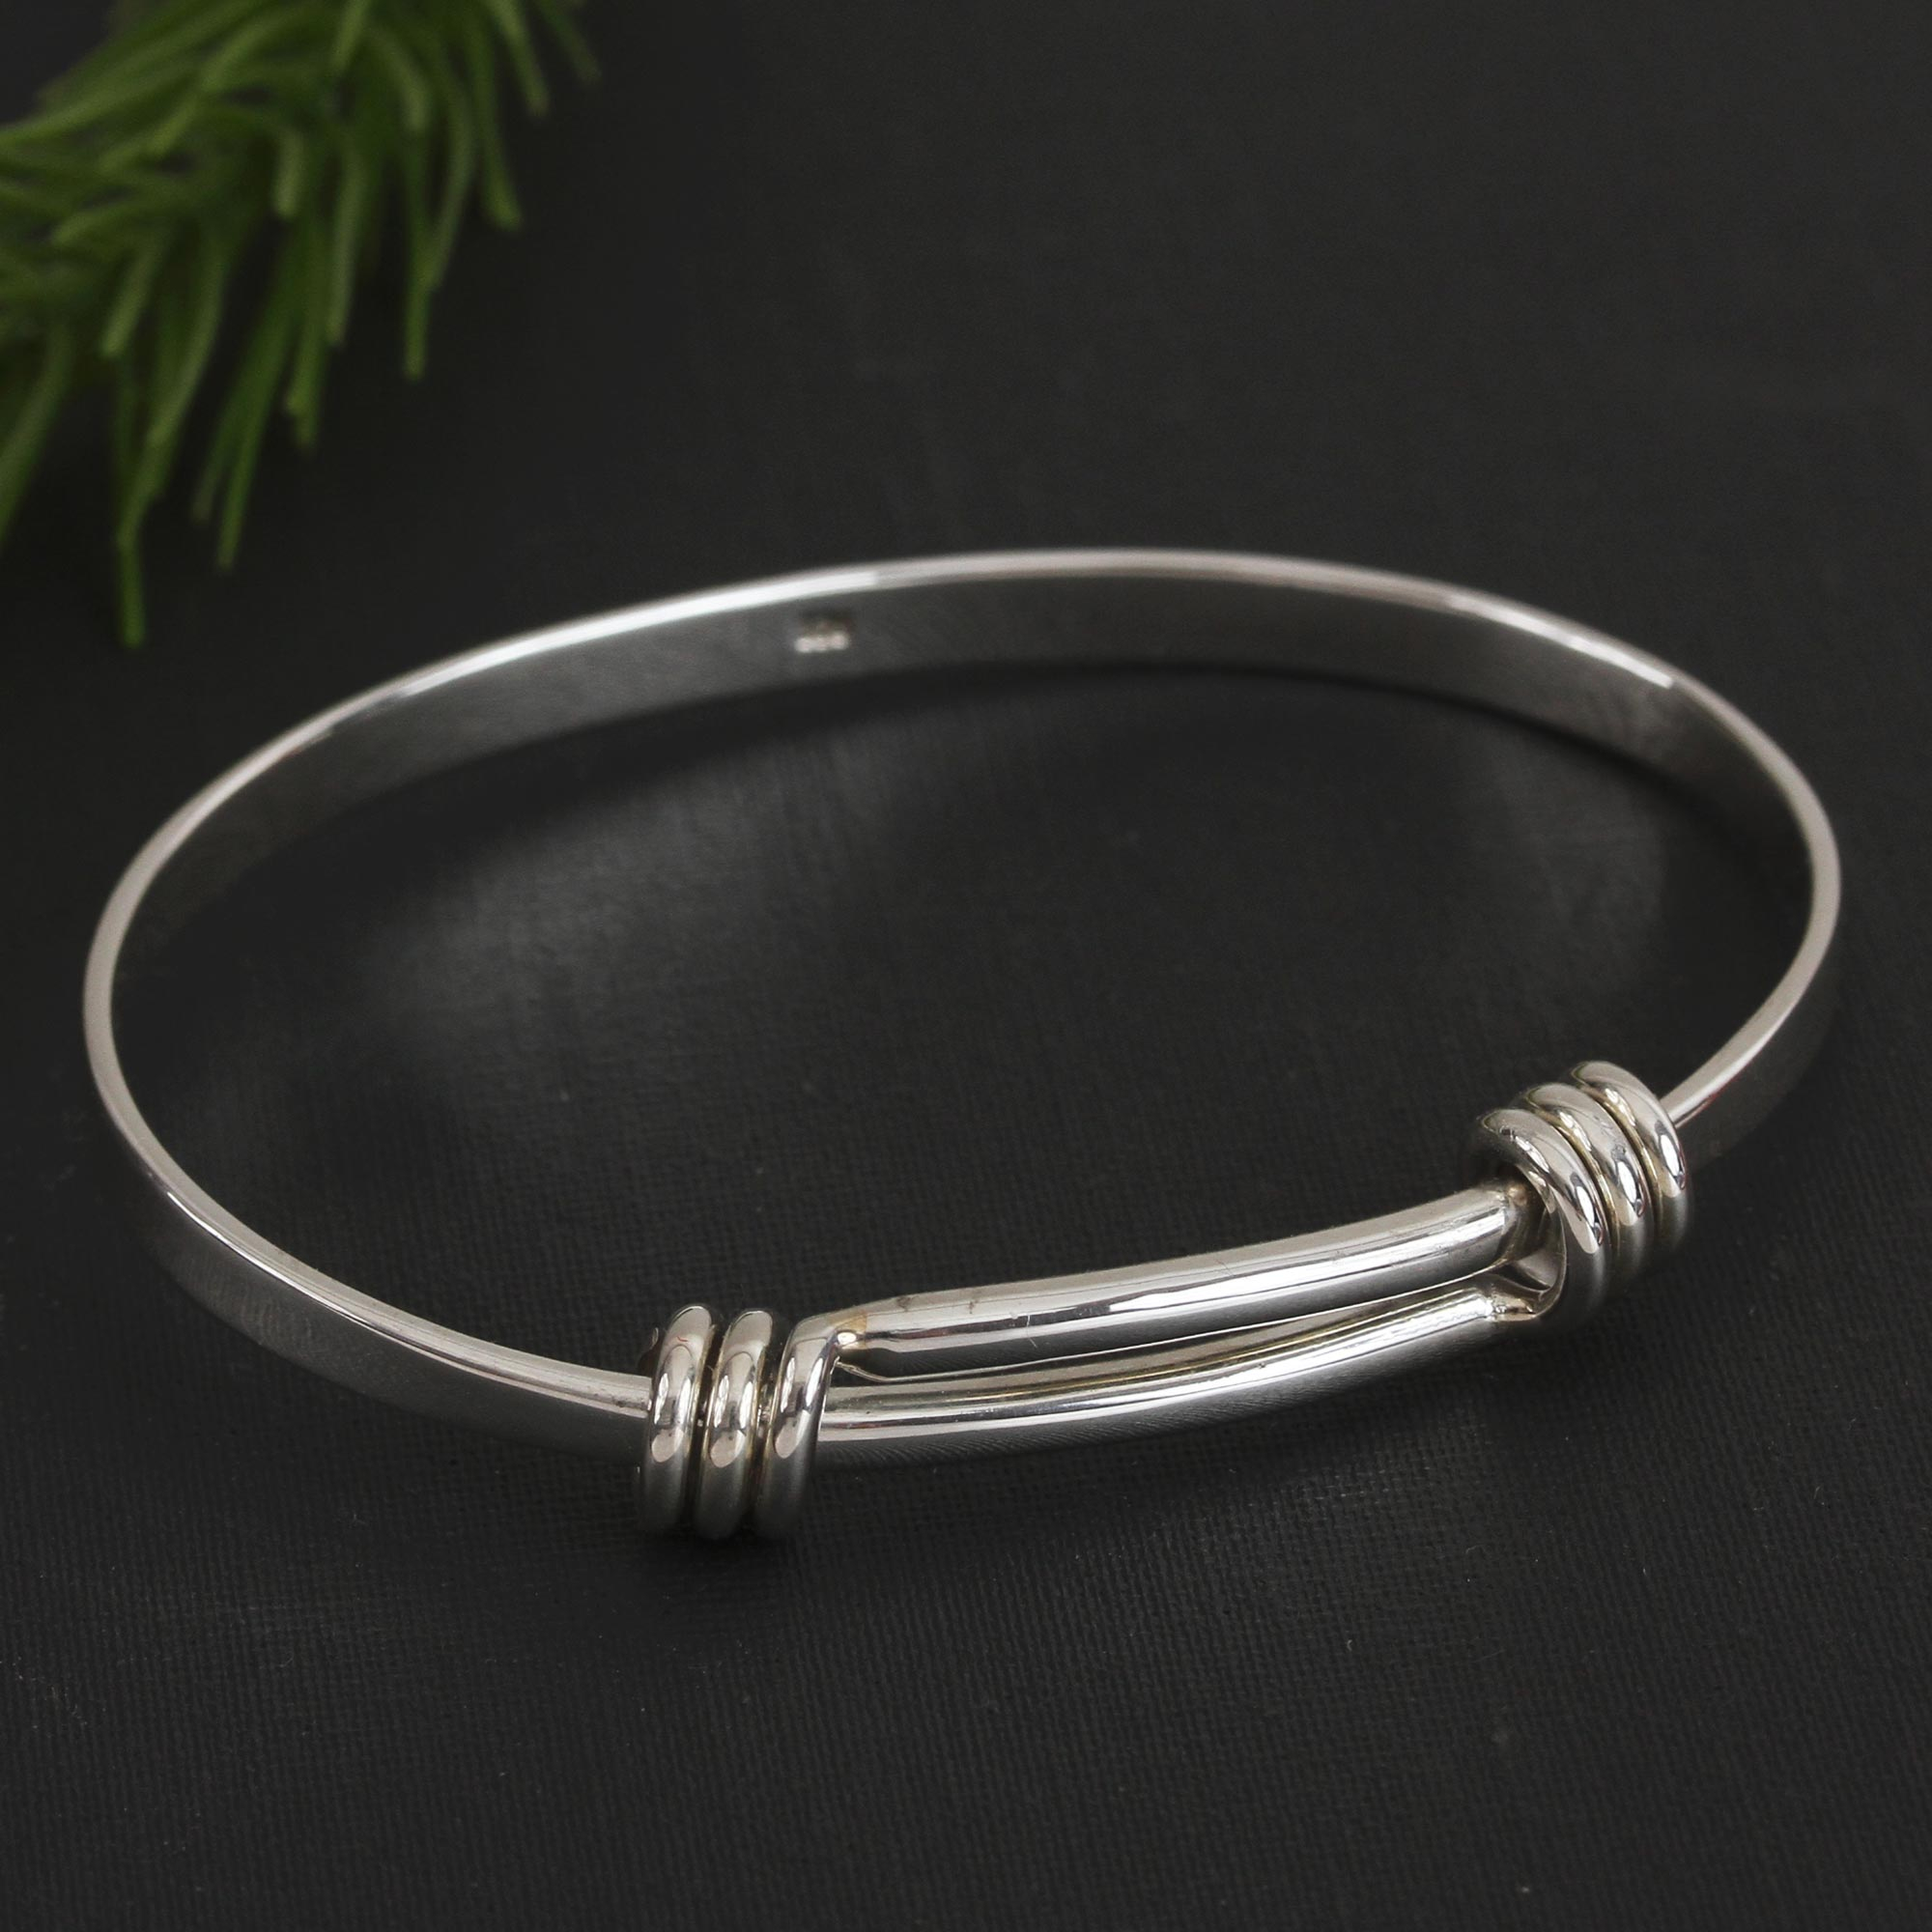 Simple Sterling Silver Bangle Bracelet Crafted in Mexico, 'Gleaming Band'